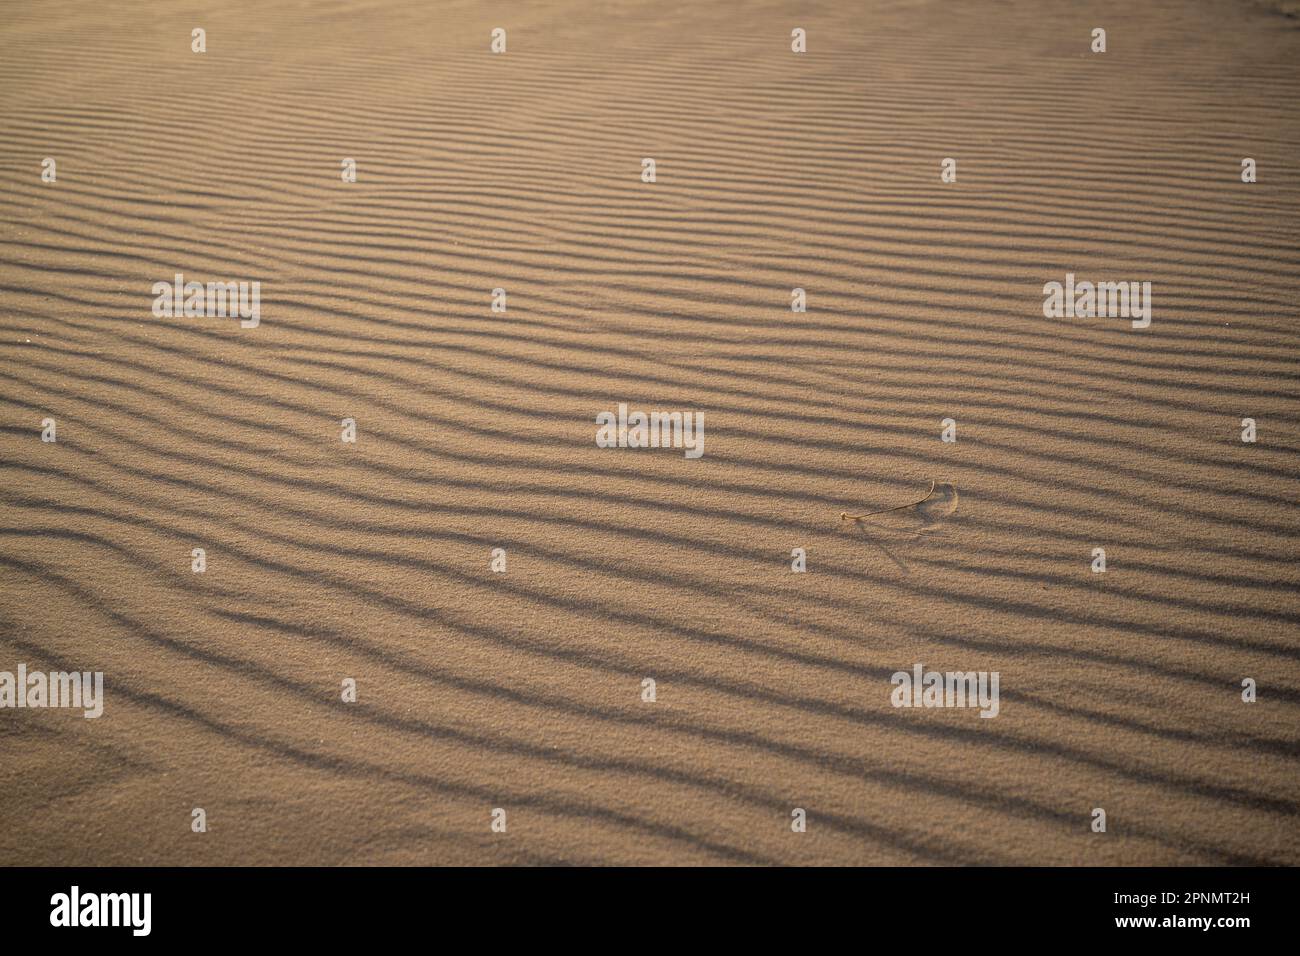 Rippled sand with contrasting lines running horizontally Stock Photo